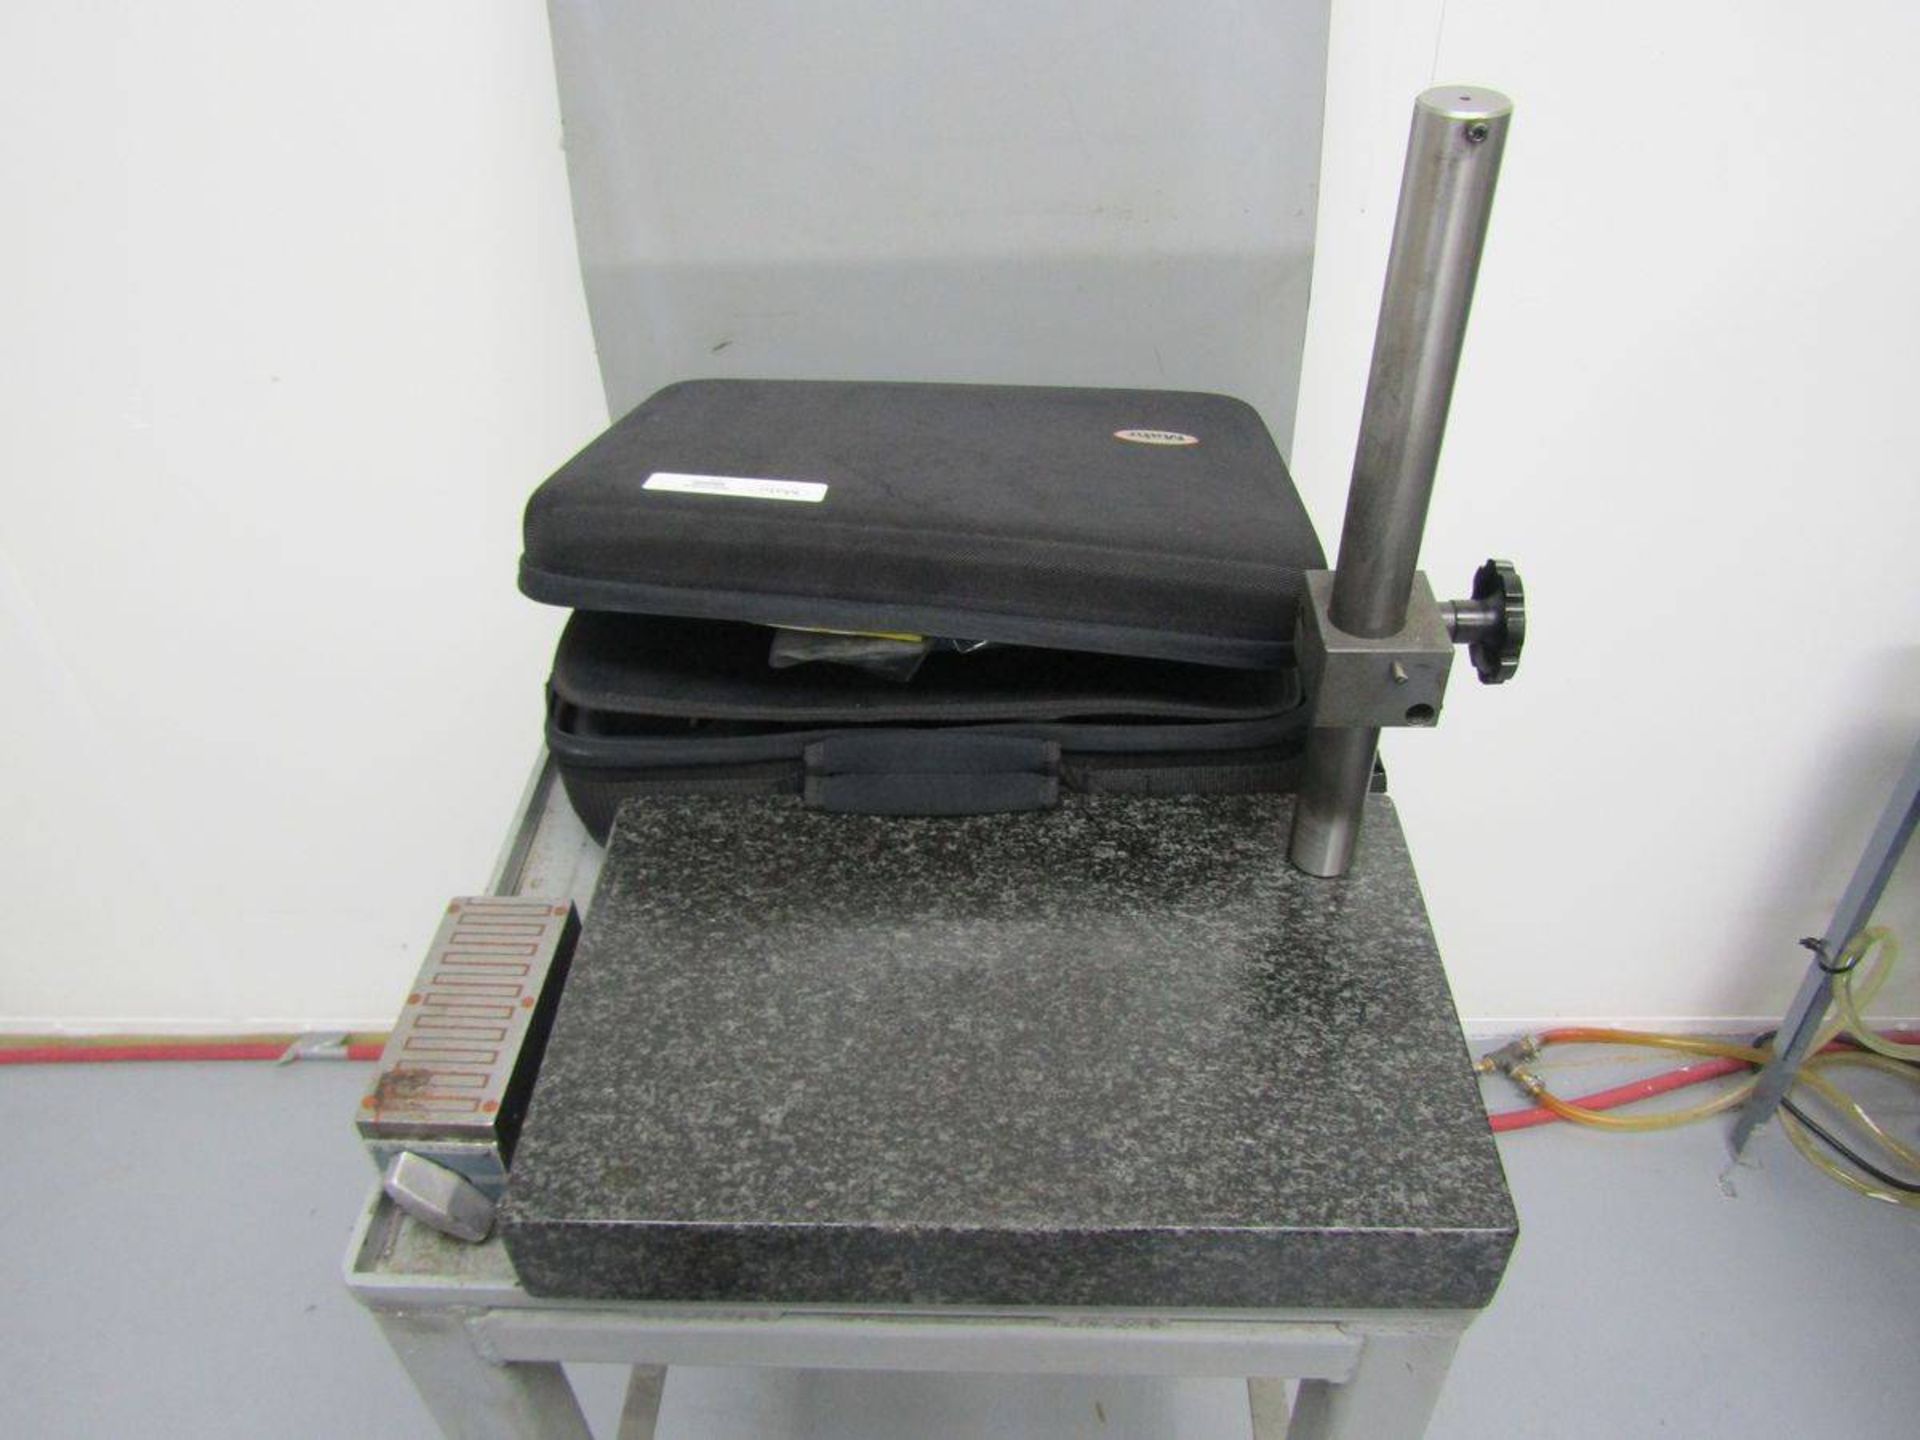 Mahr MarSurf M400 Digital Surface Roughness Tester - Image 5 of 5